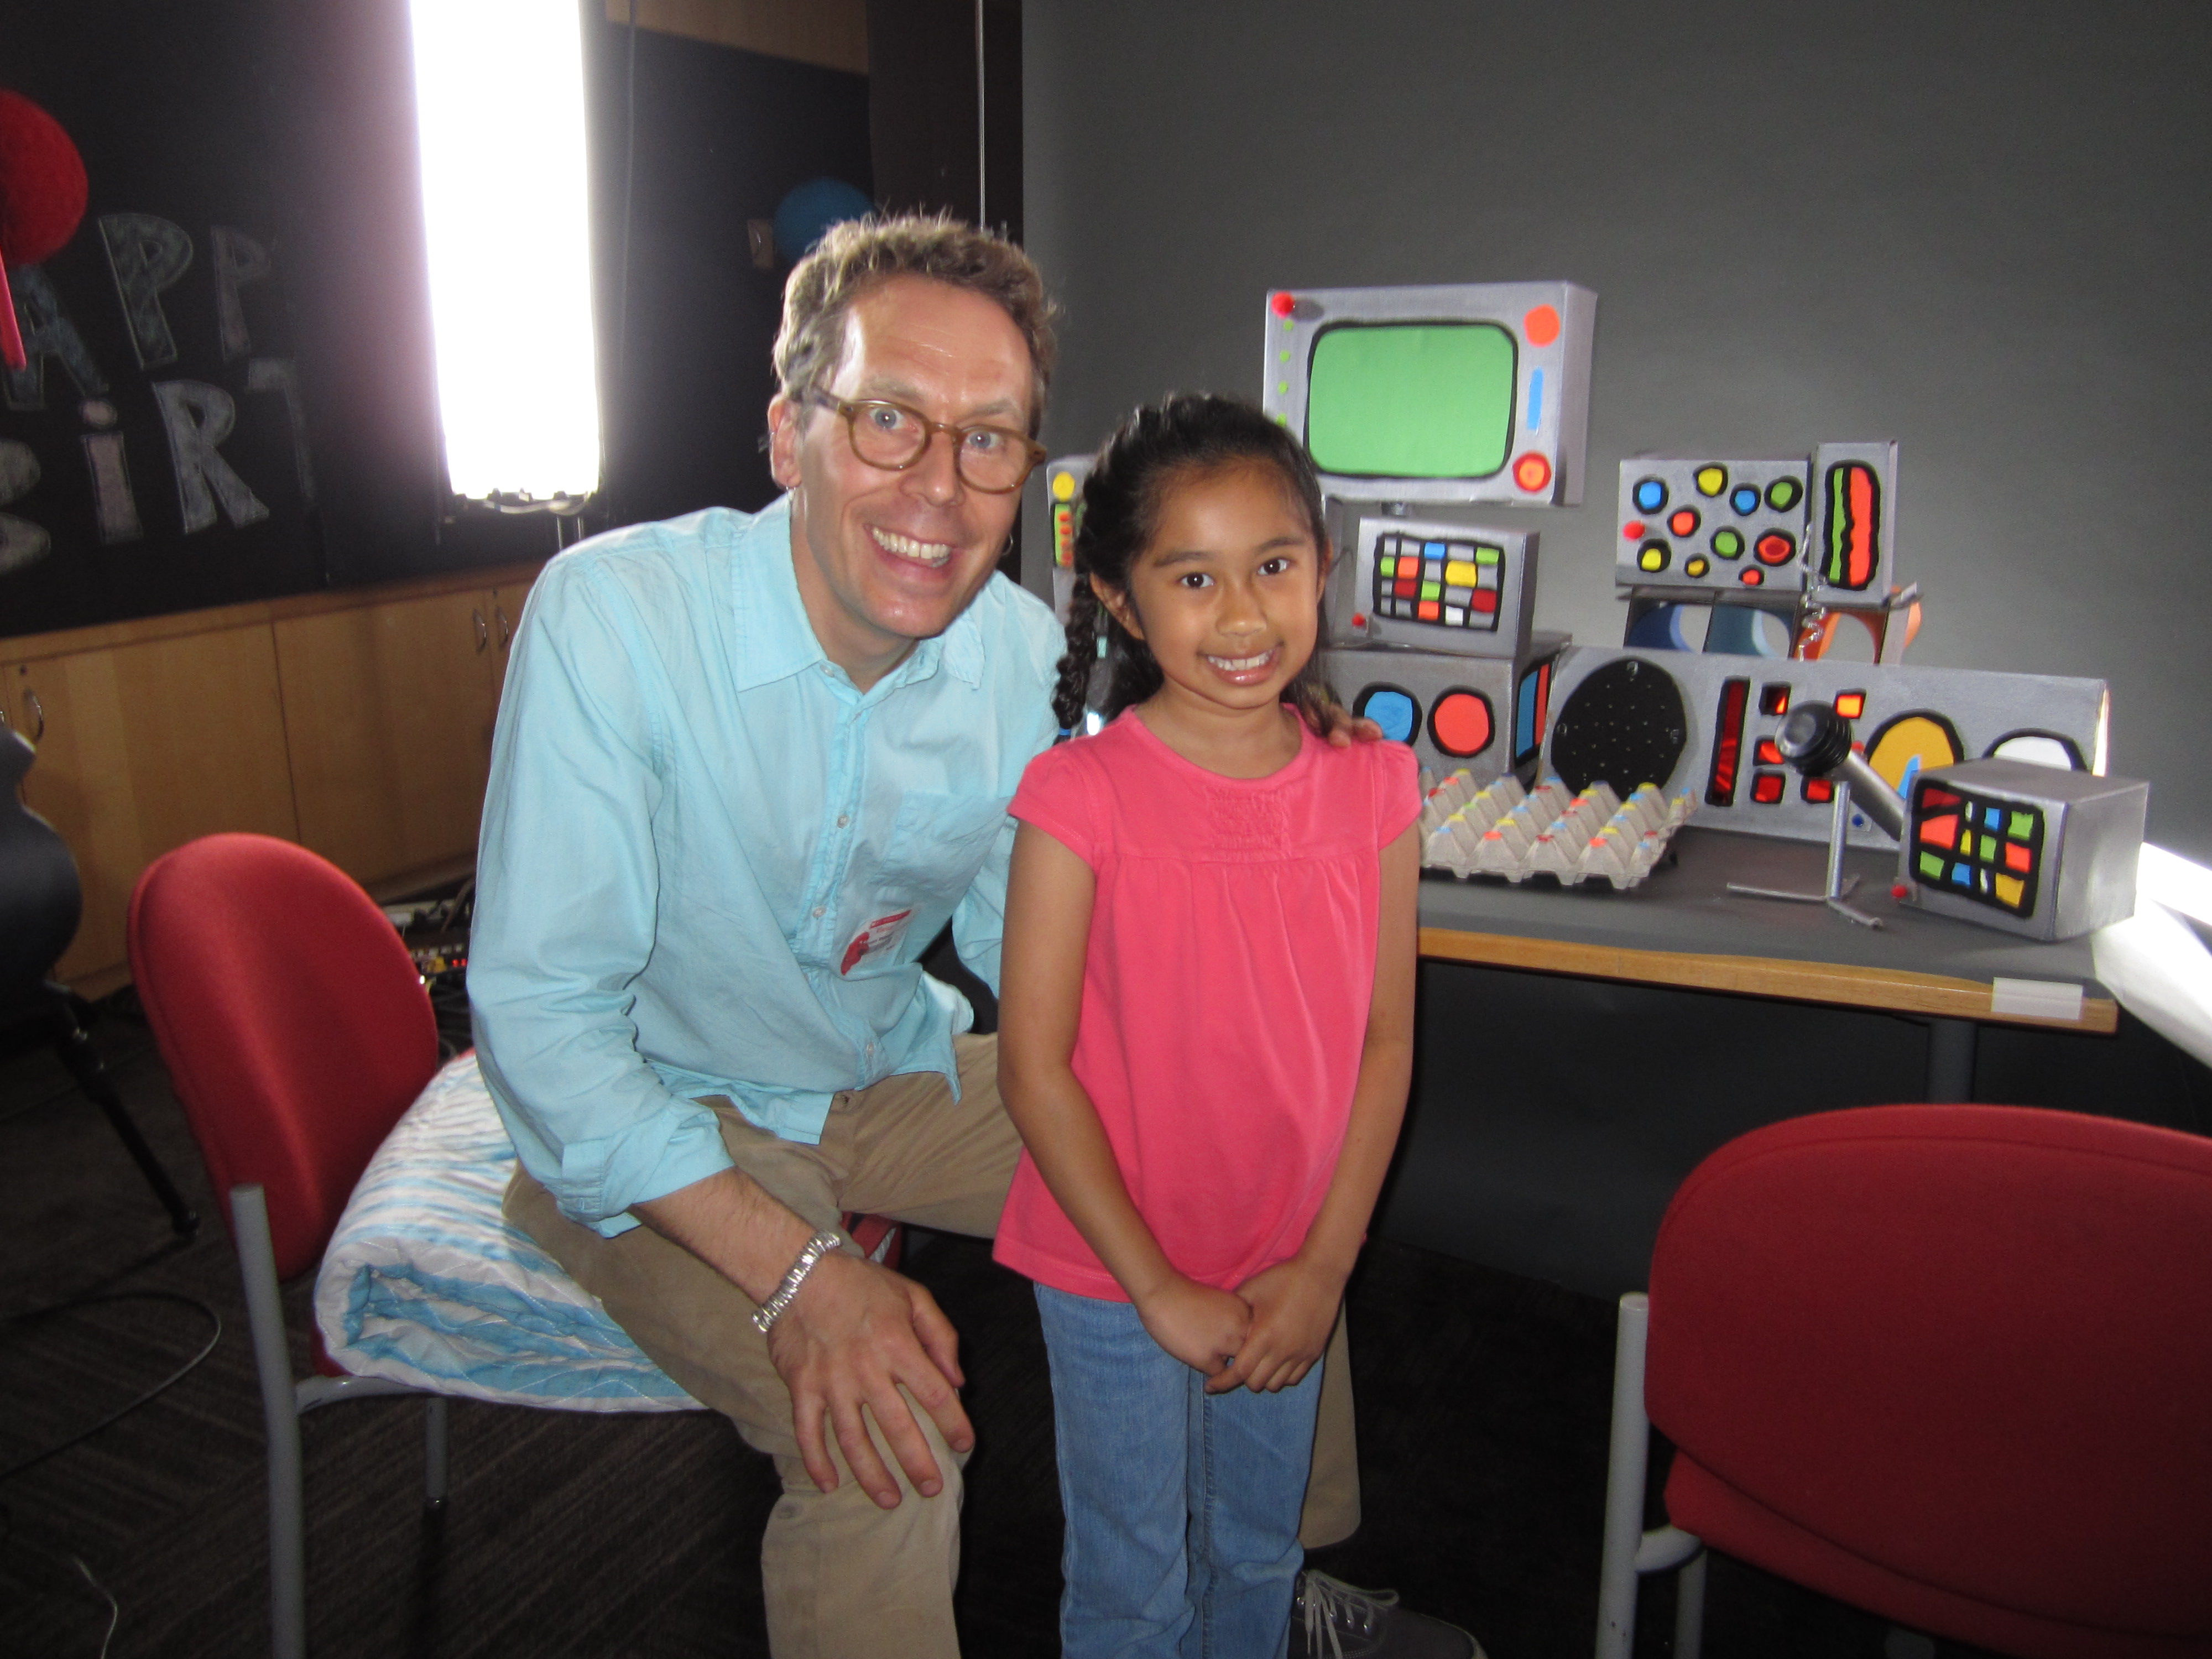 With director Graham, on set of Scholastic video shoot - June 2012